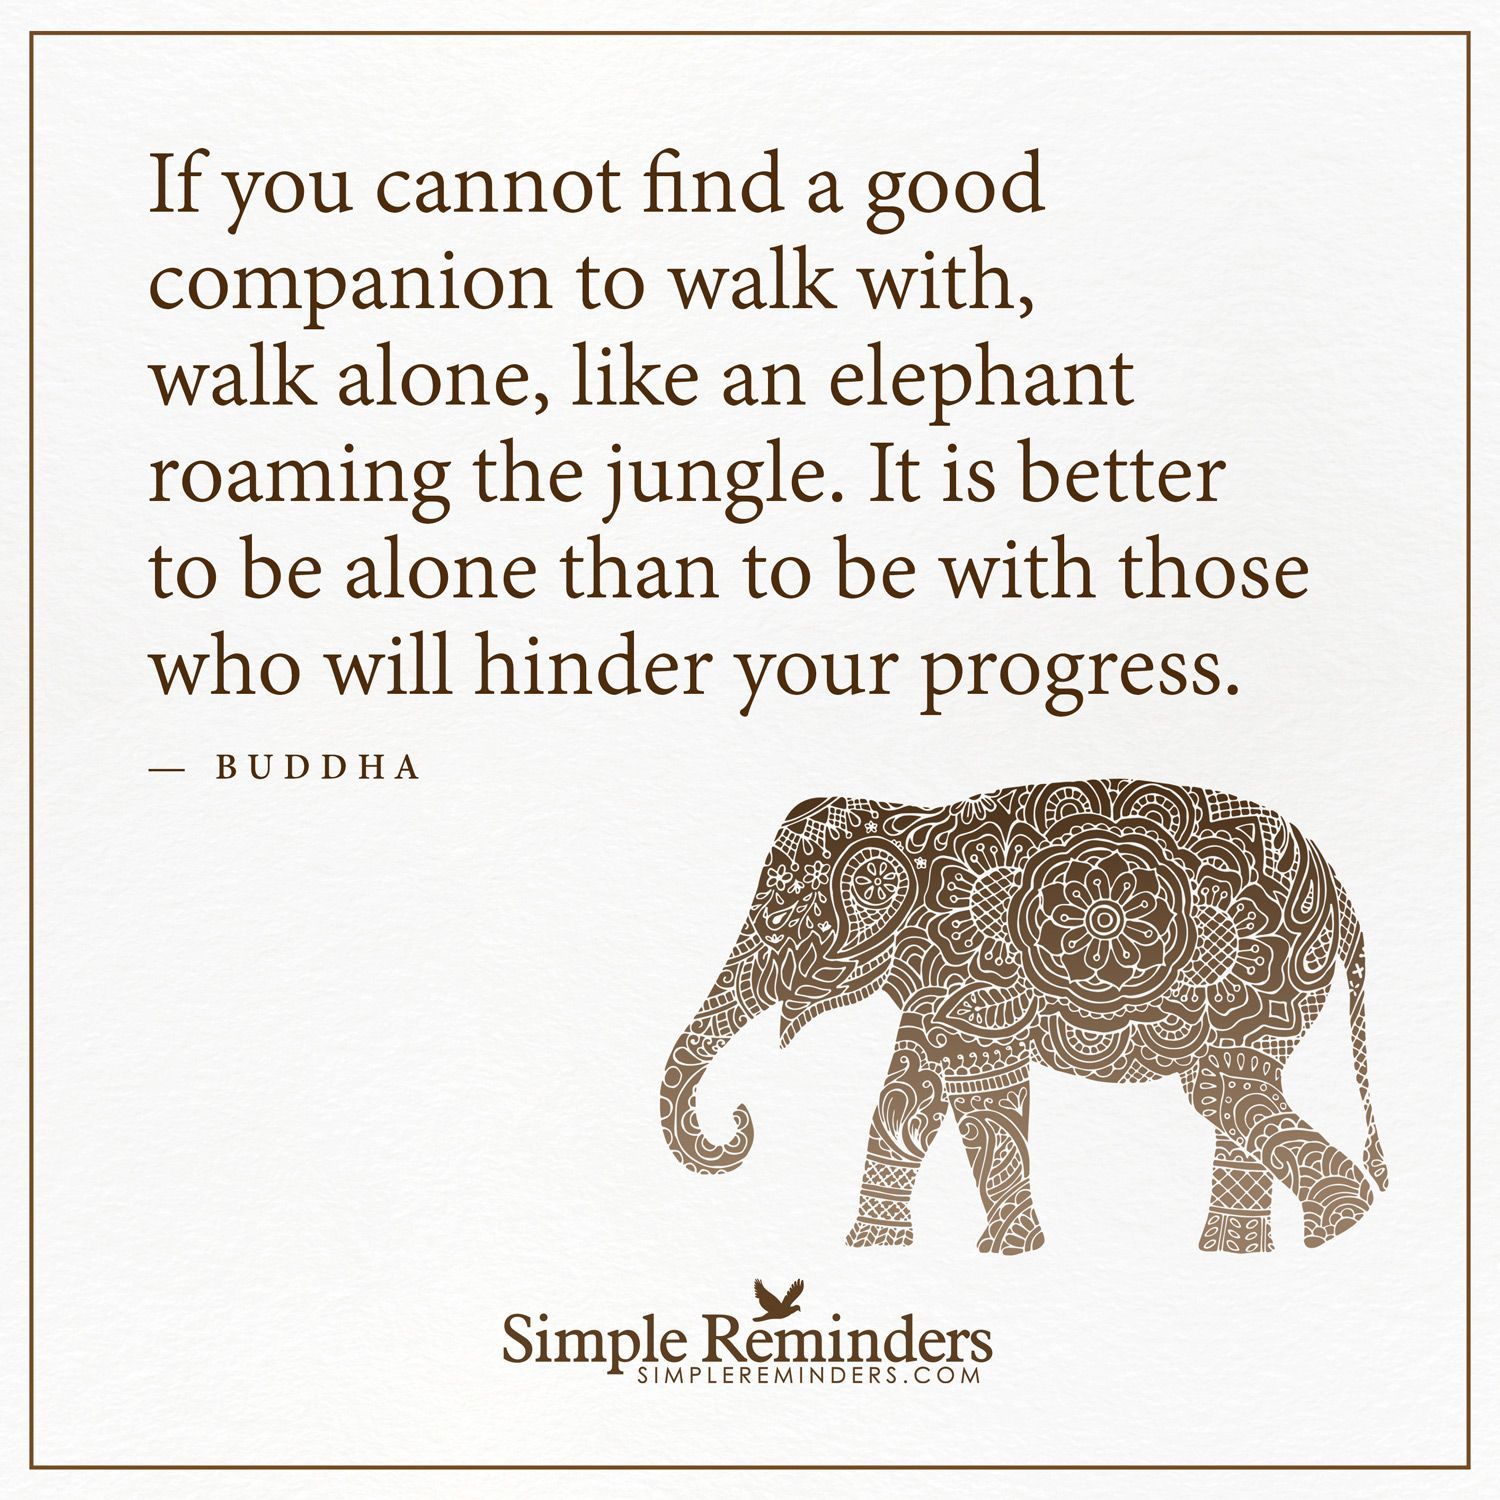 Walk alone If you cannot find a good companion to walk with, walk alone, like an elephant roaming the jungle. It is better to be